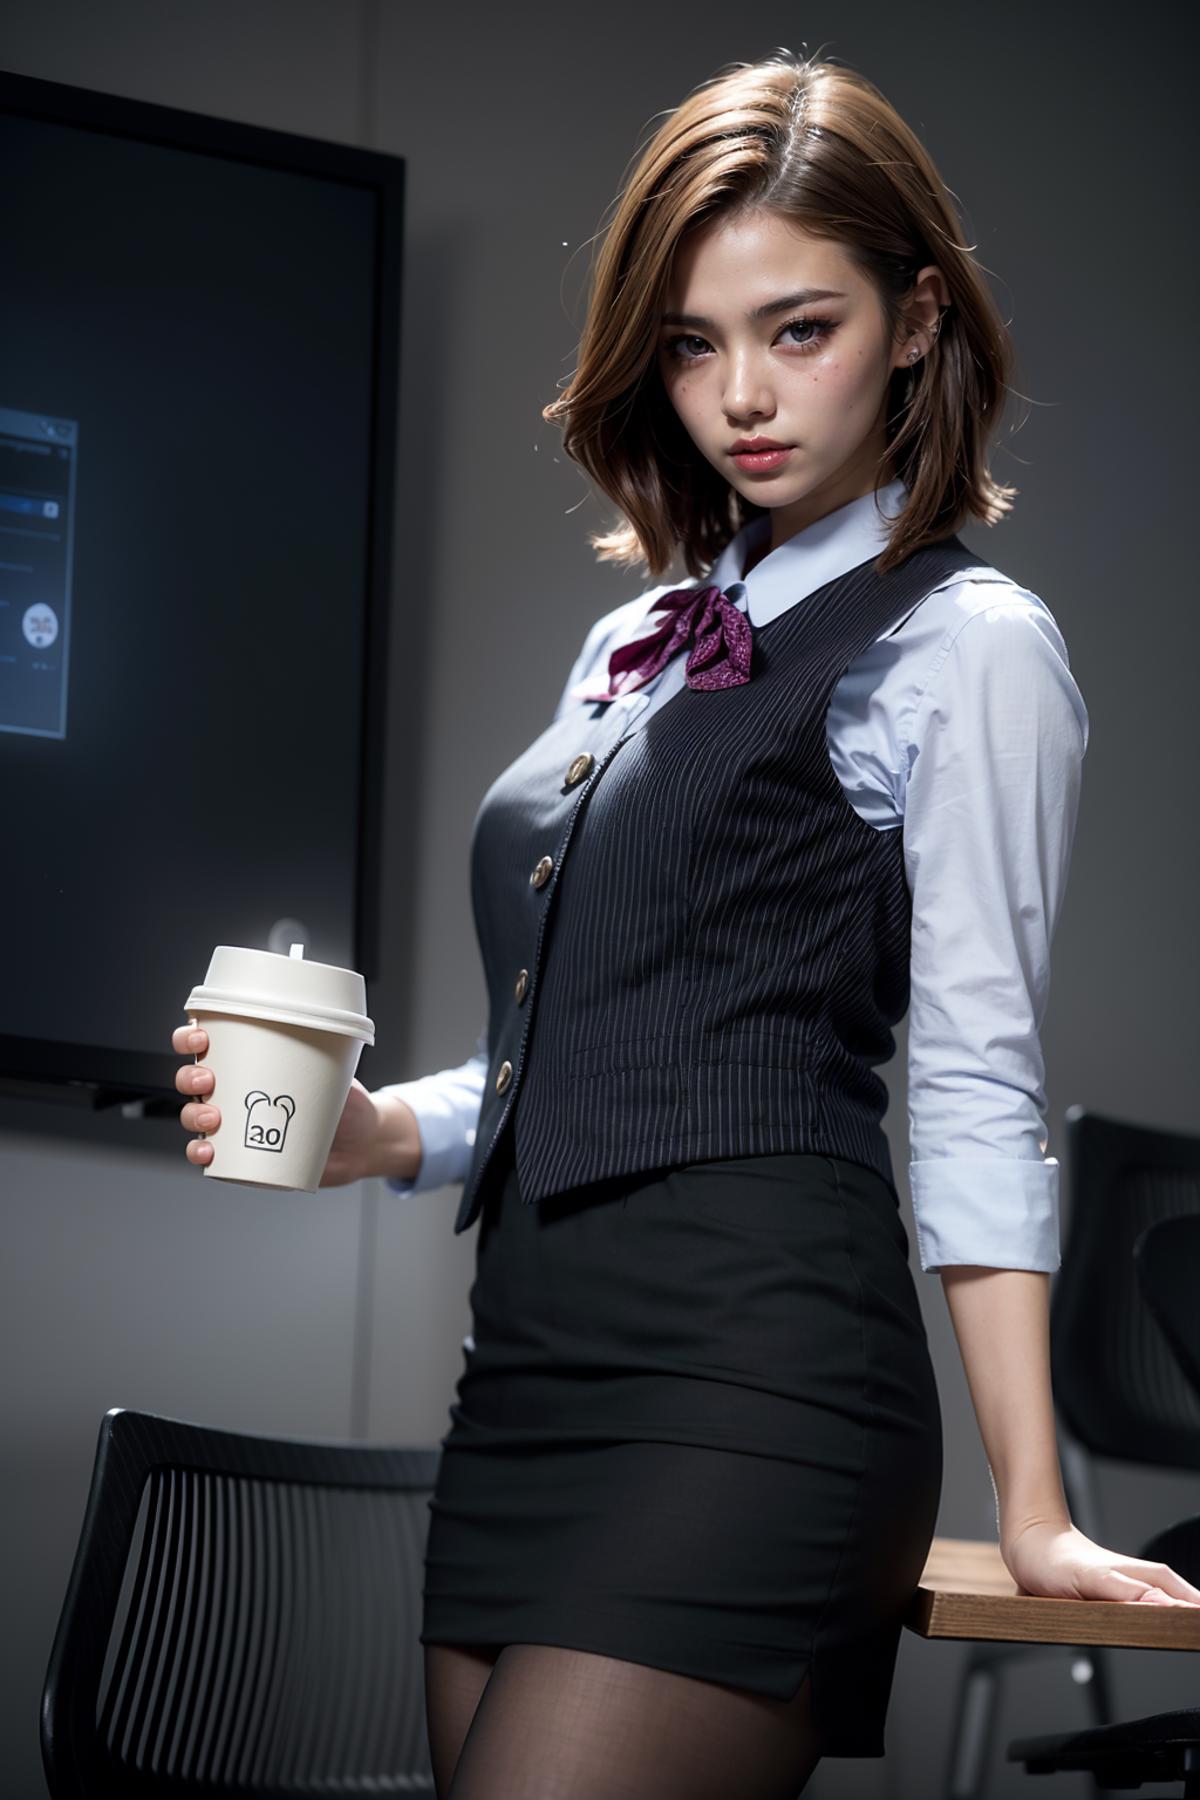 Sexy Office Lady image by feetie